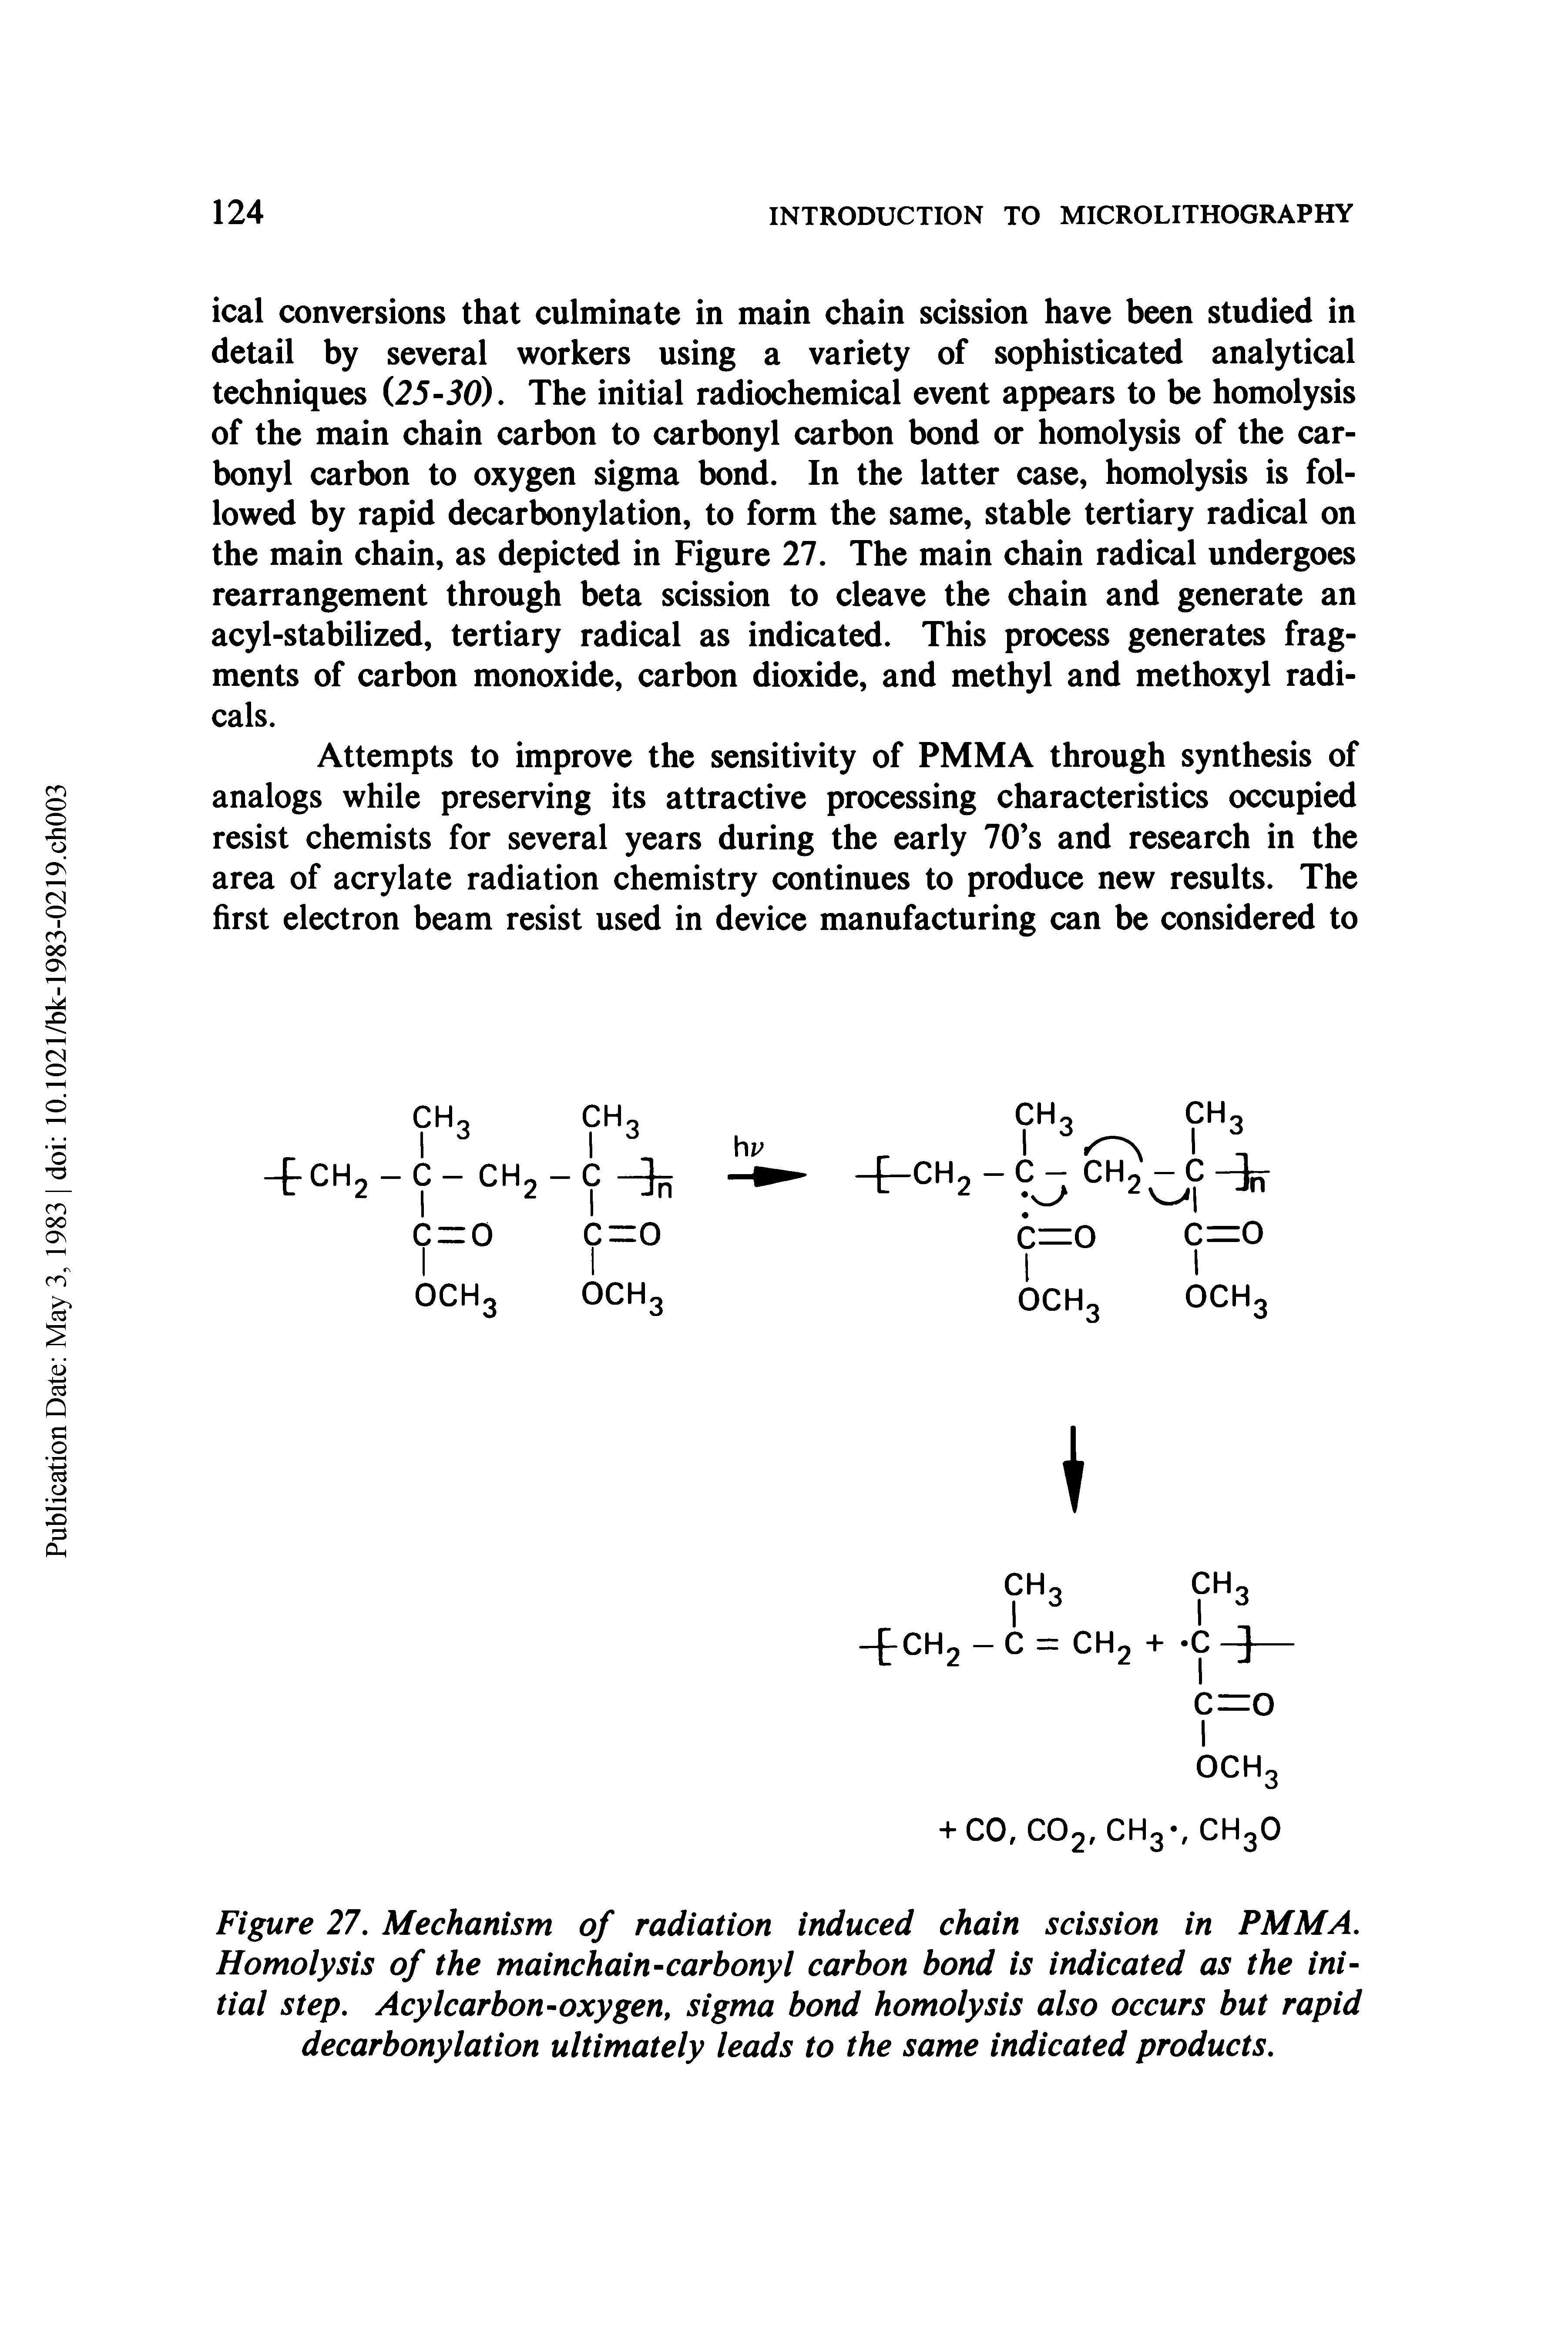 Figure 27. Mechanism of radiation induced chain scission in PMMA. Homolysis of the mainchain-carbonyl carbon bond is indicated as the initial step. Acylcarbon-oxygen, sigma bond homolysis also occurs but rapid decarbonylation ultimately leads to the same indicated products.